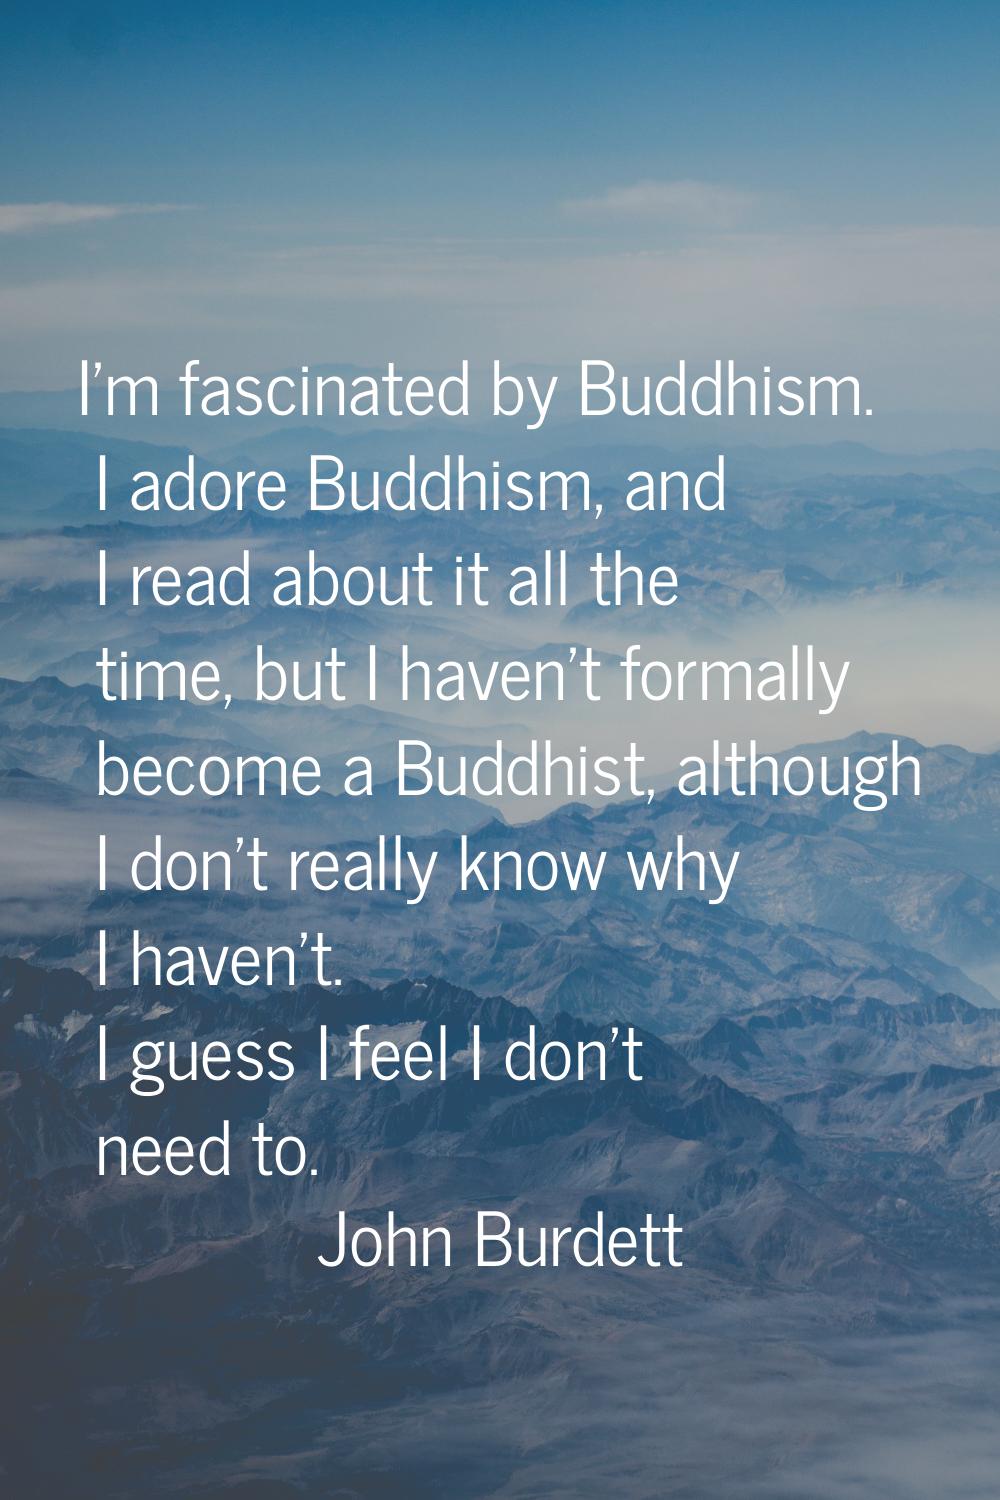 I'm fascinated by Buddhism. I adore Buddhism, and I read about it all the time, but I haven't forma